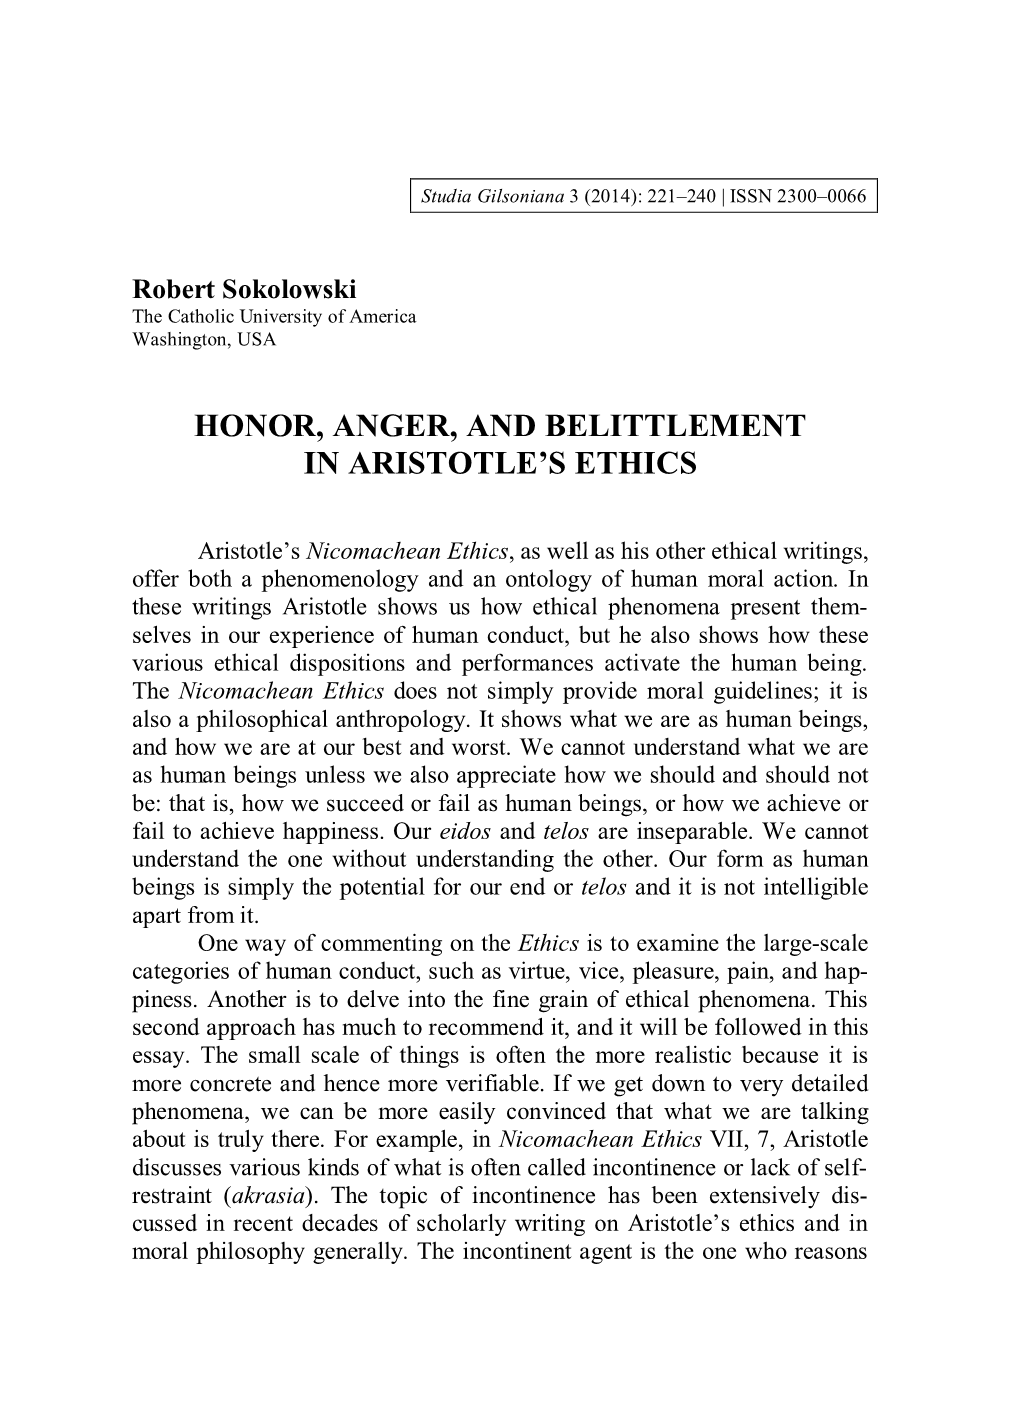 Honor, Anger, and Belittlement in Aristotle's